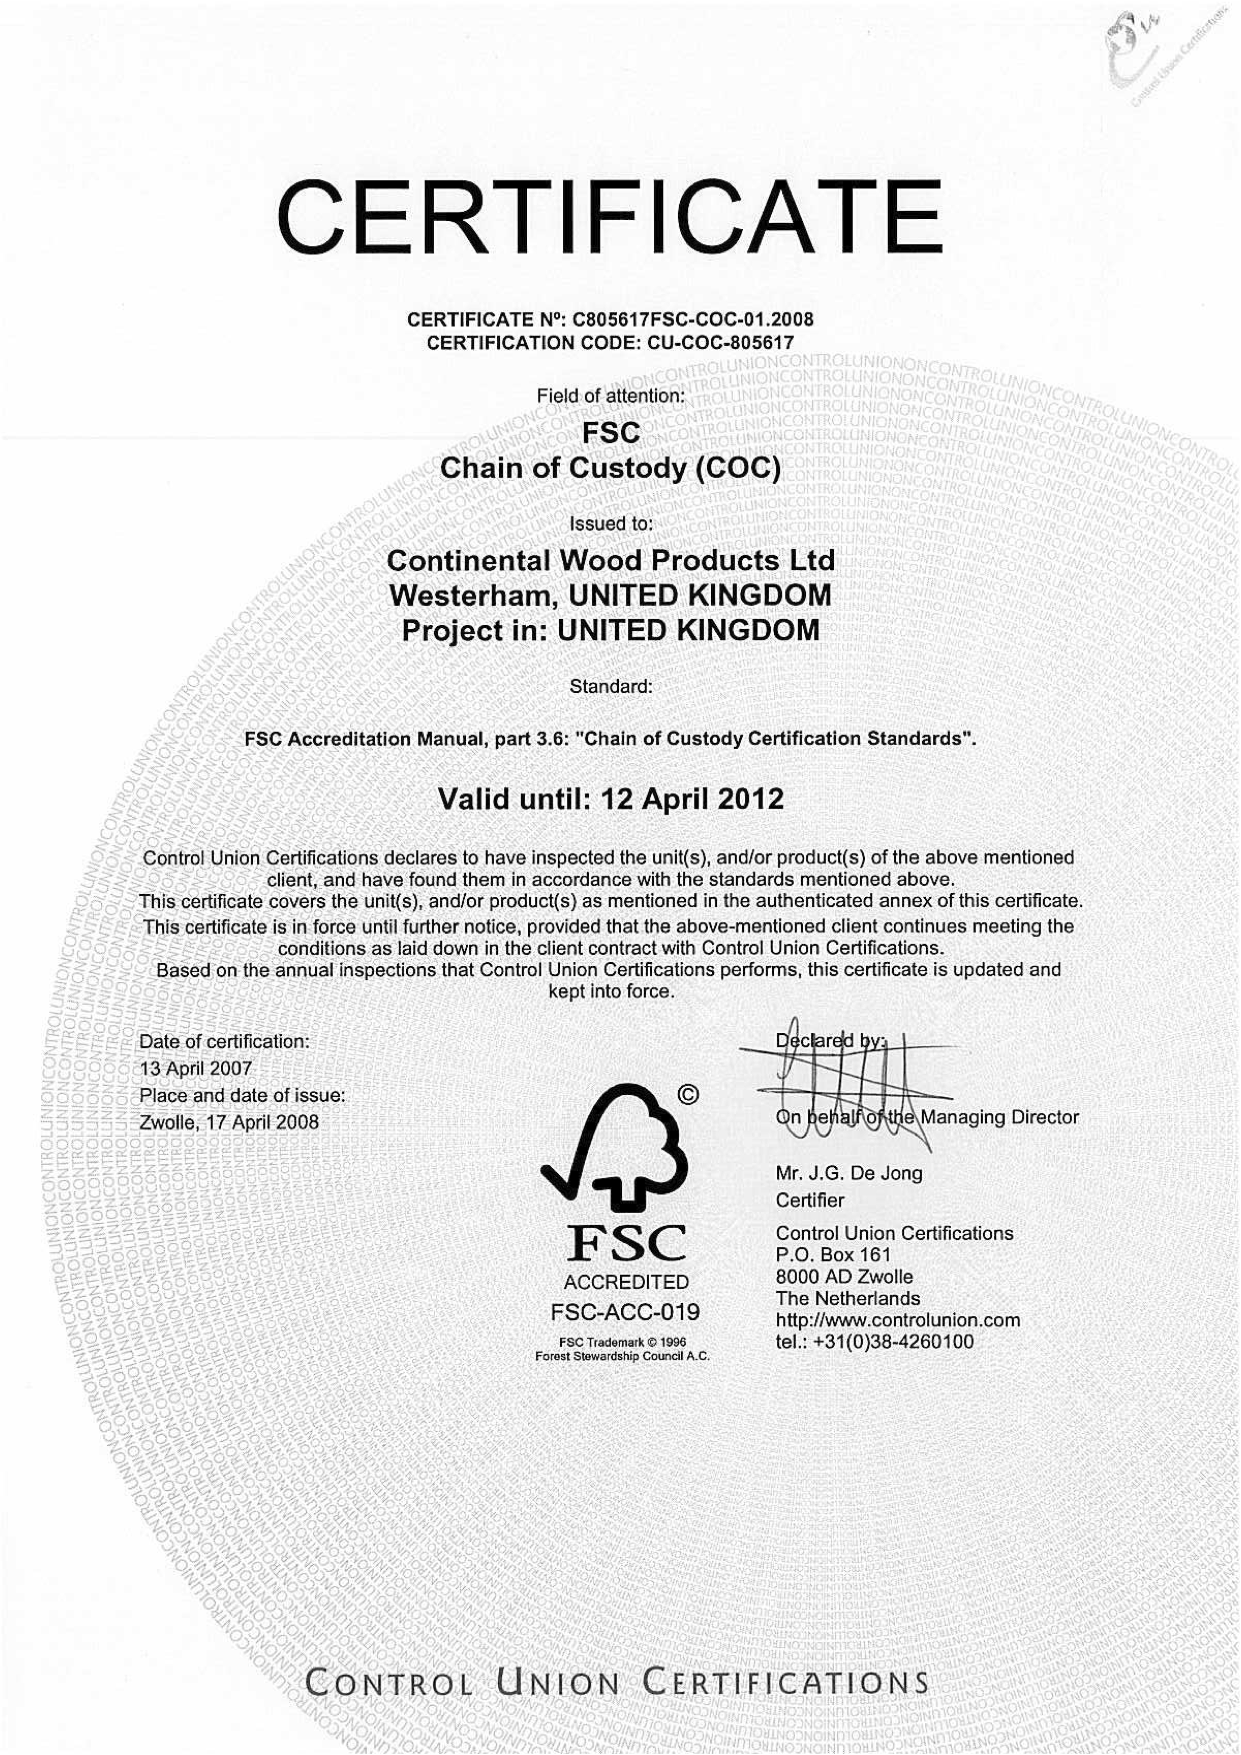 FSC certificate relating to wood used in HM frames 2008-2012